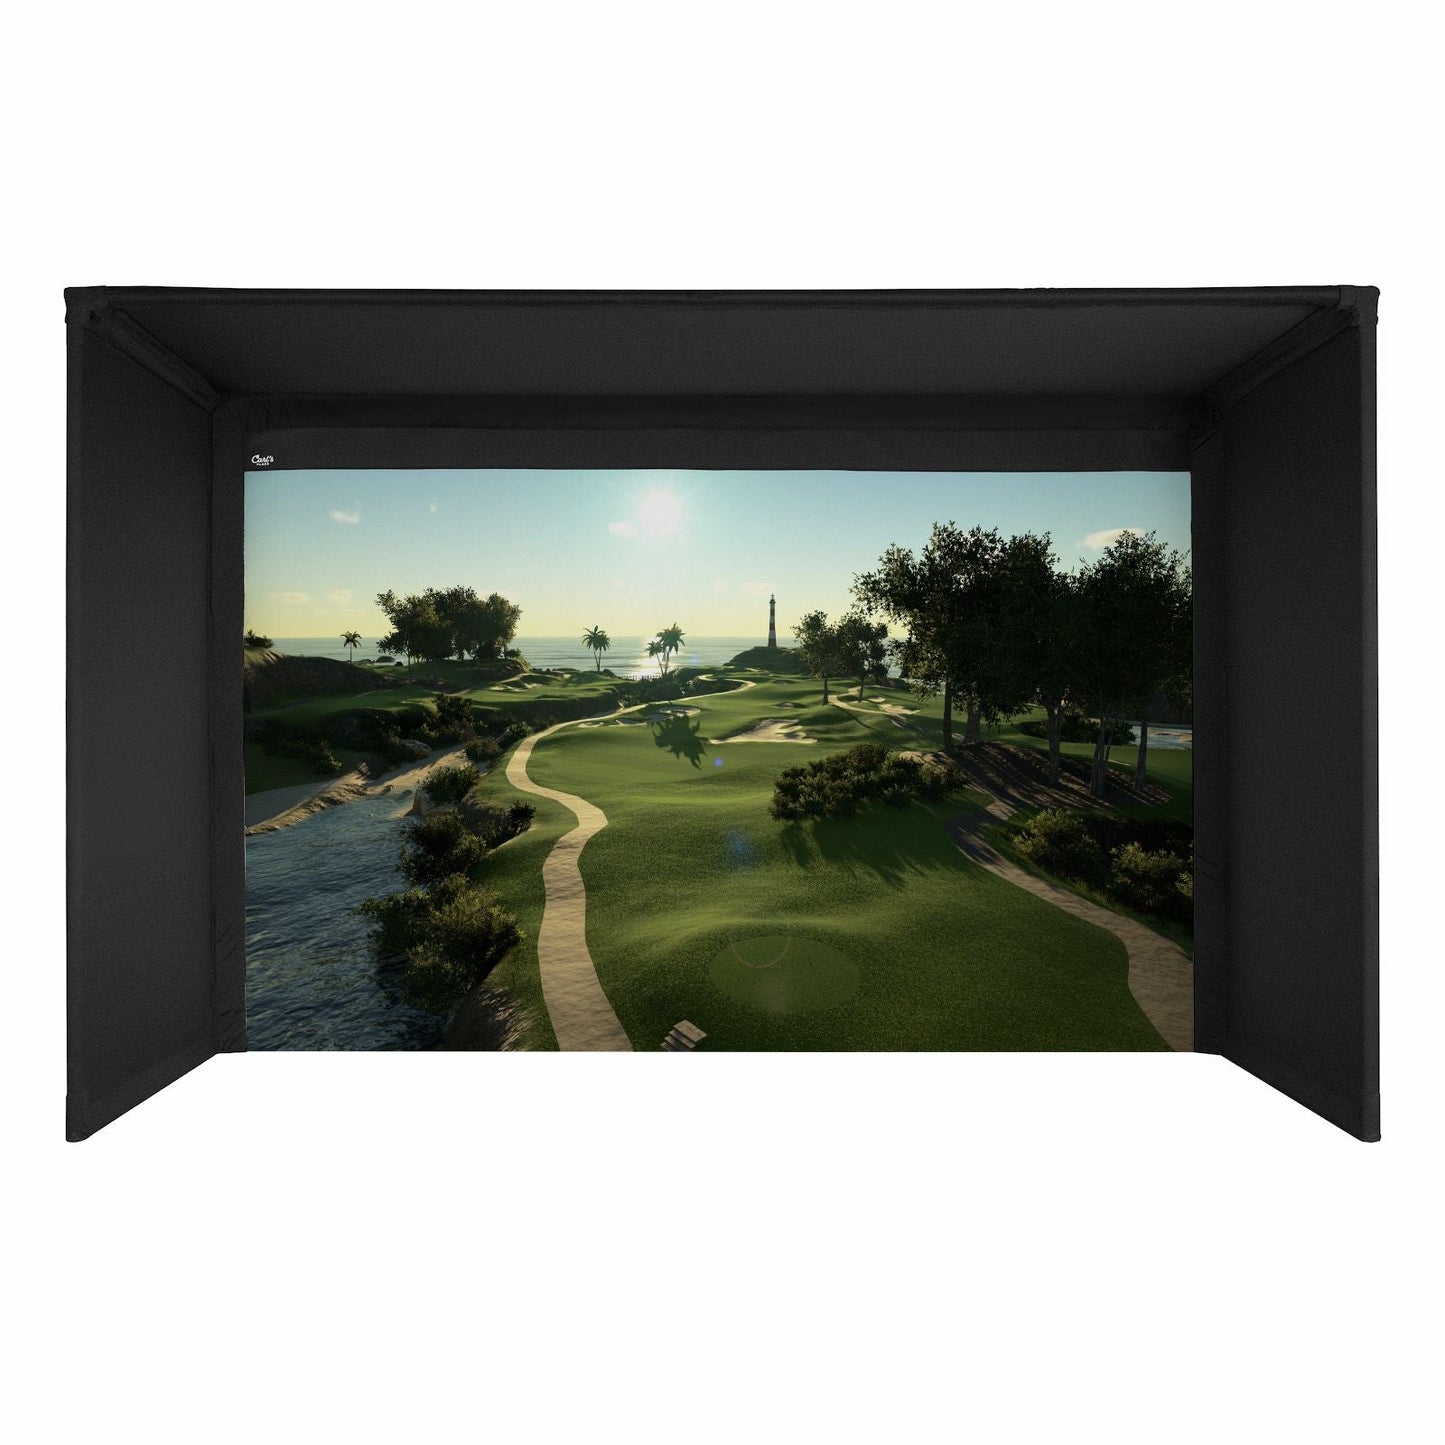 Carl's Place - Golf Simulators, Screens and Enclosures for Indoor Golf -  Carl's Place